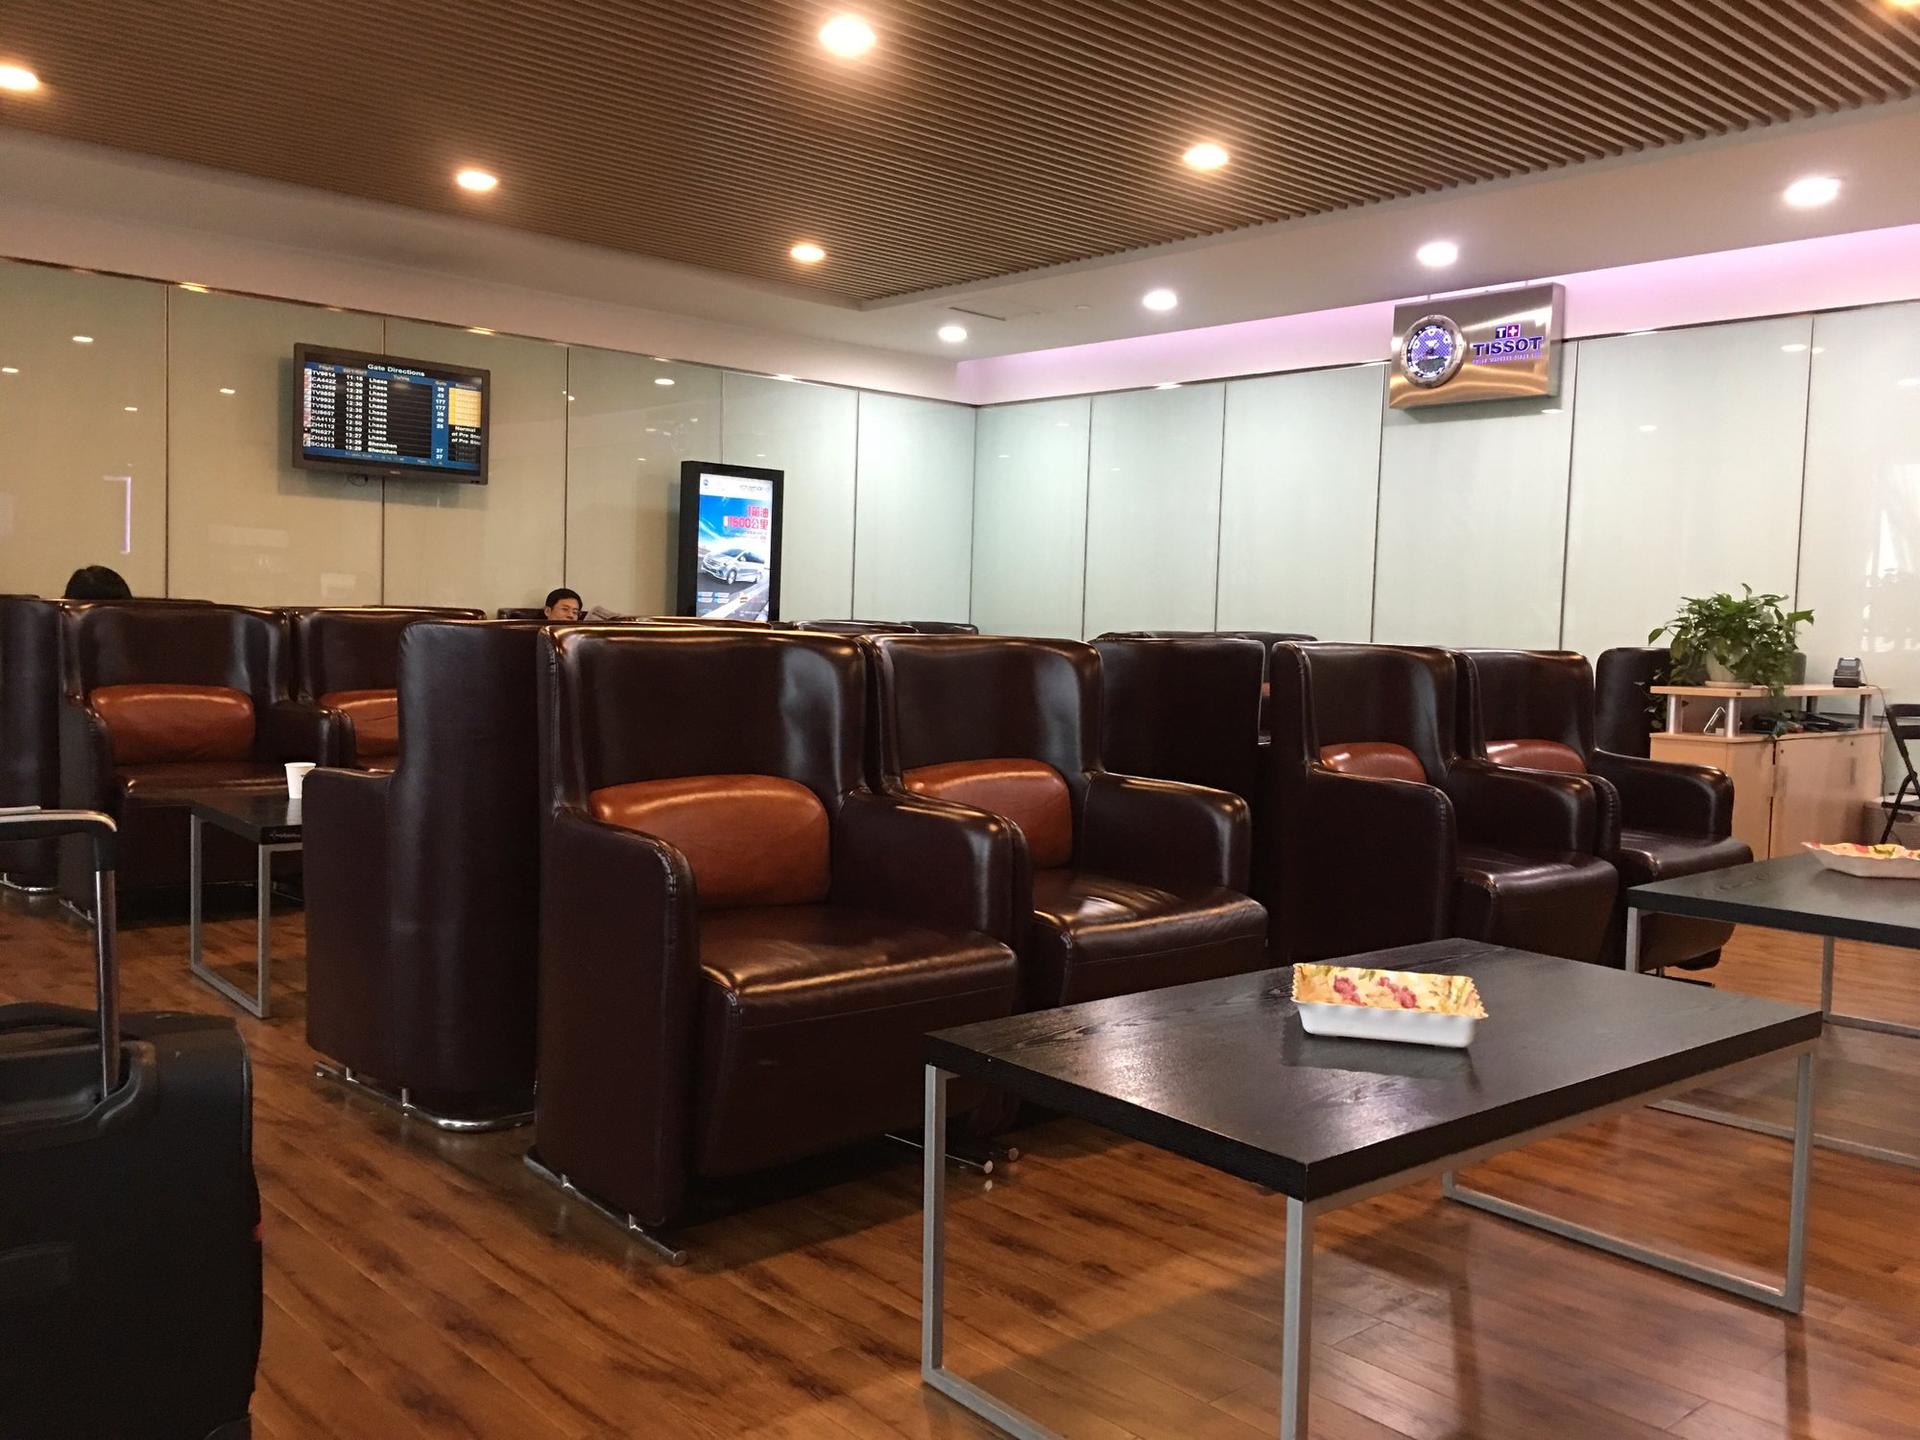 Chengdu Airport First Class Lounge (Gate 169) image 1 of 3